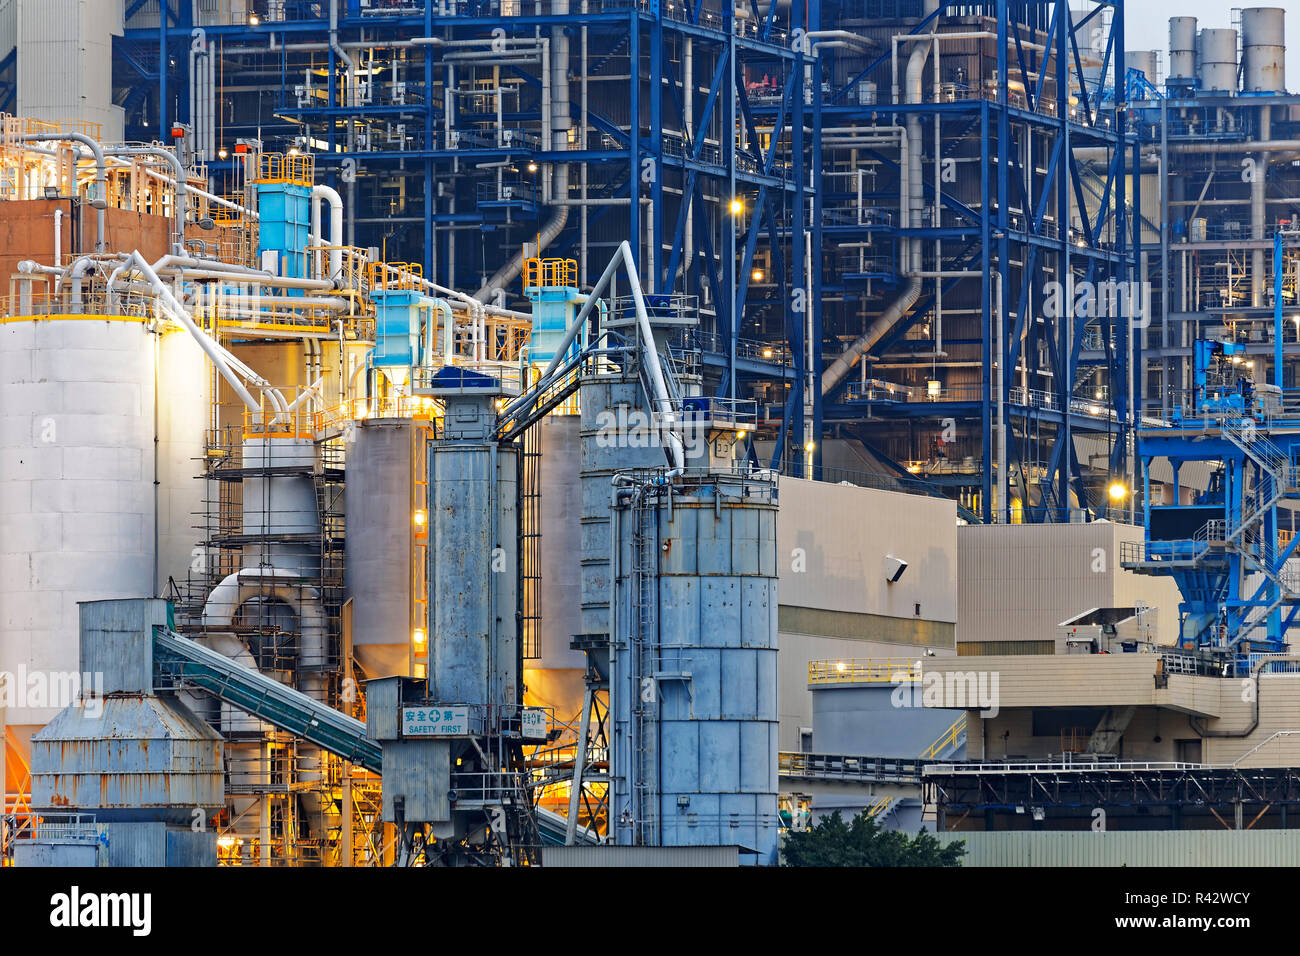 petrochemical industry on sunset Stock Photo